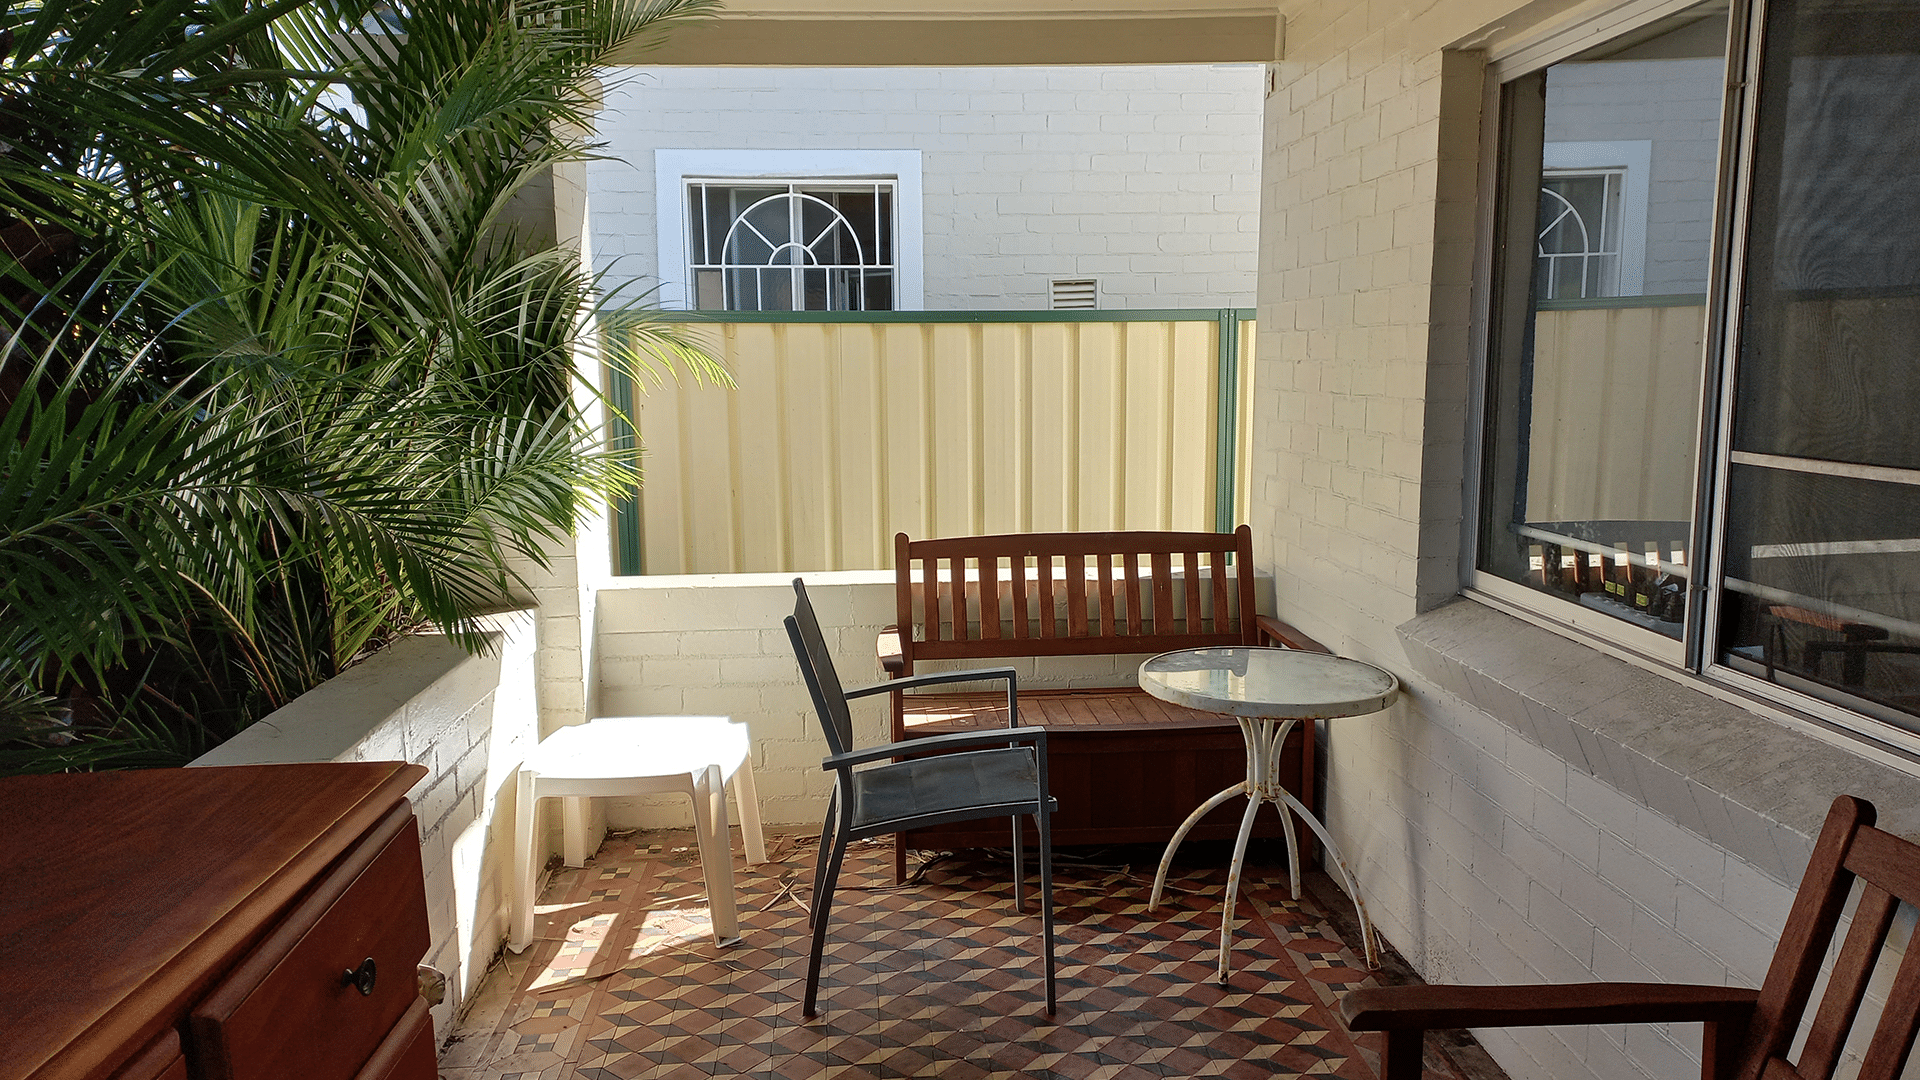 View of the undercover front verandah with outdoor furniture.